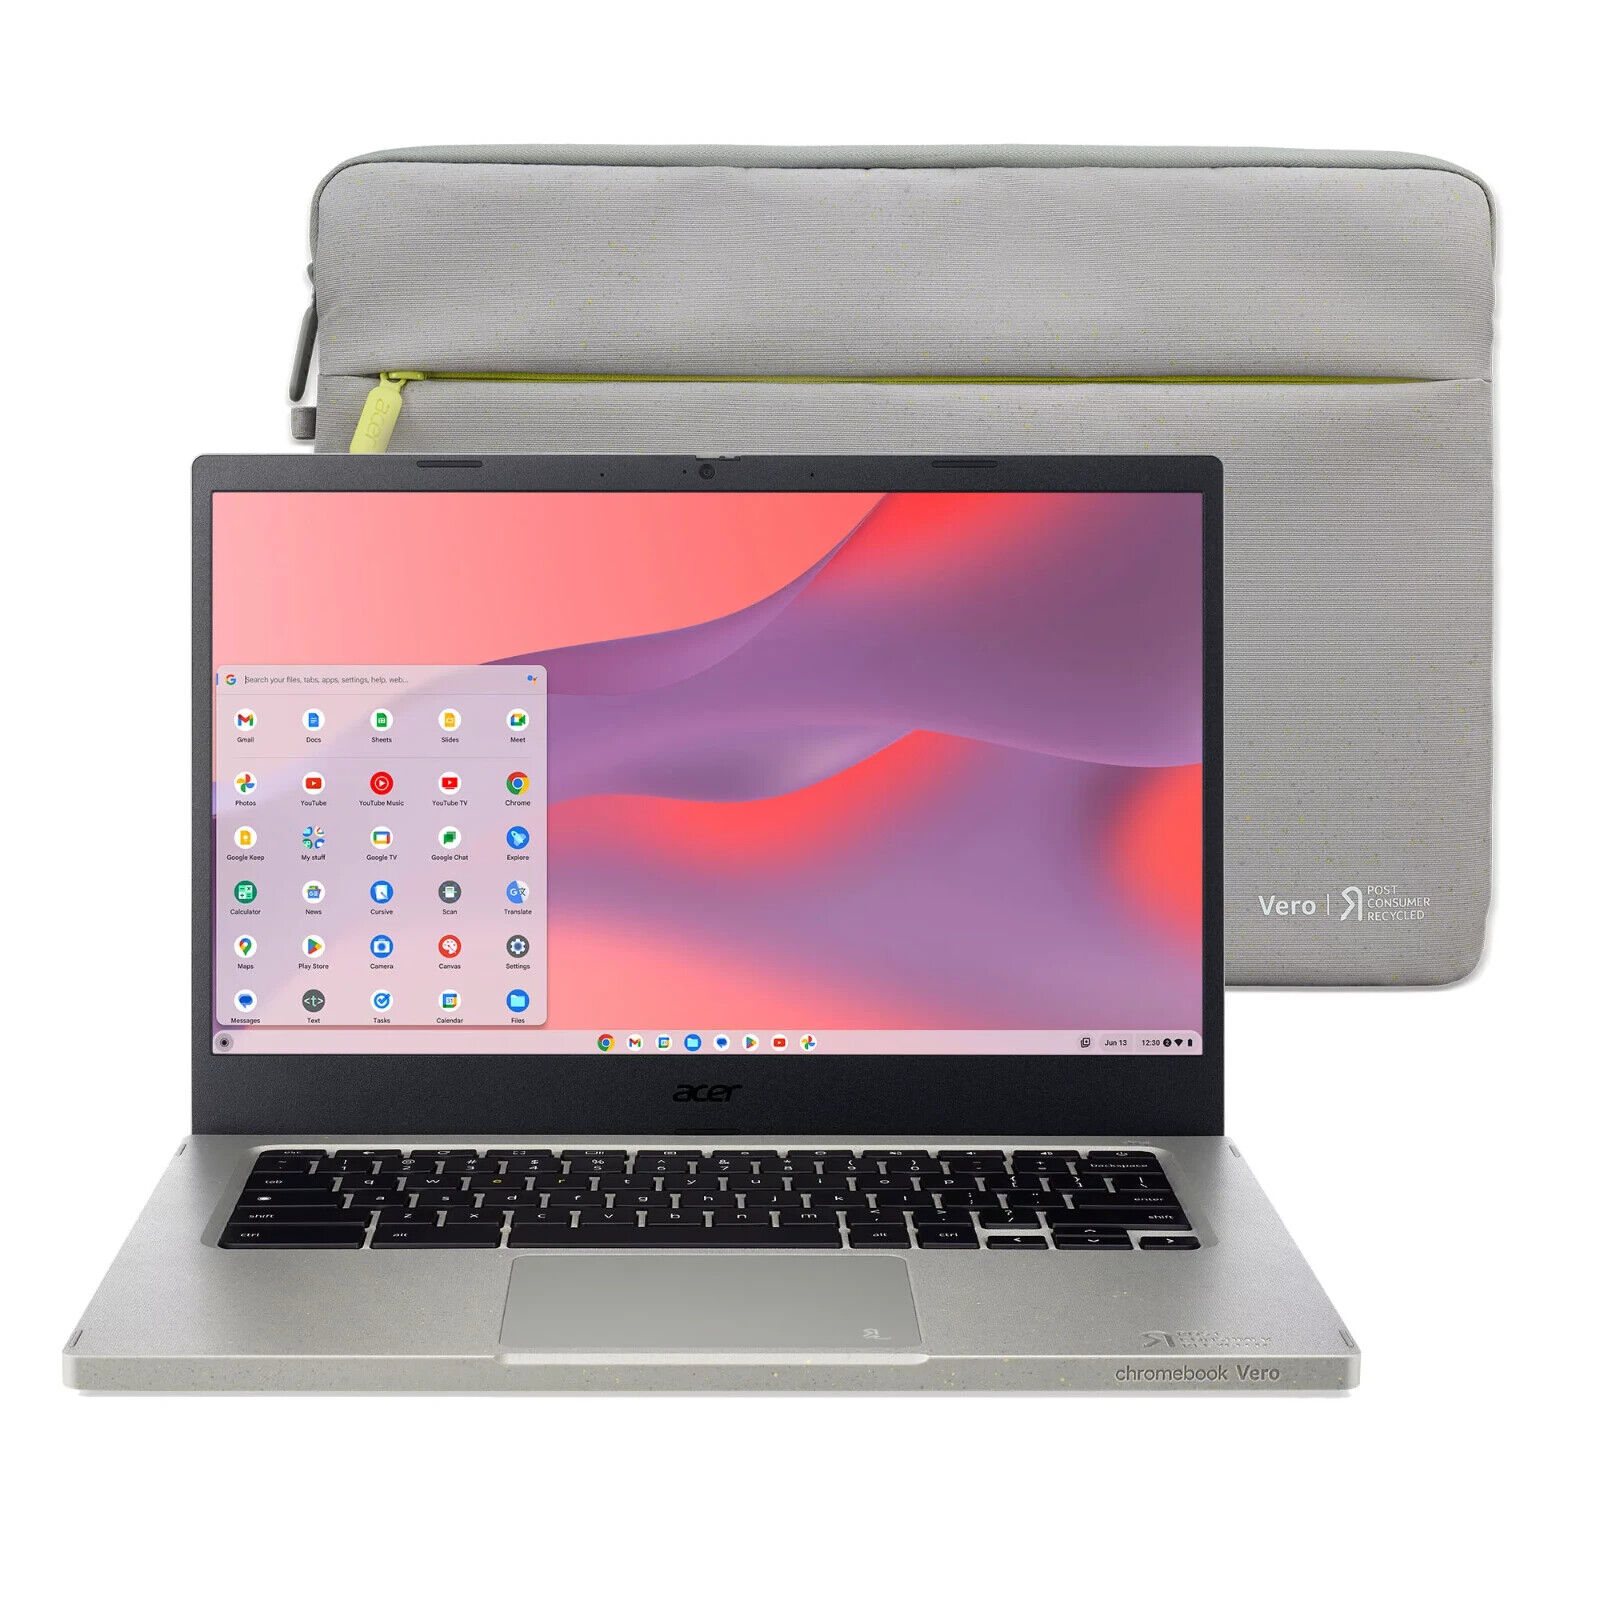 Brand New Sealed Acer Chromebook Vero 514 + Acer Sleeve, With Warranty